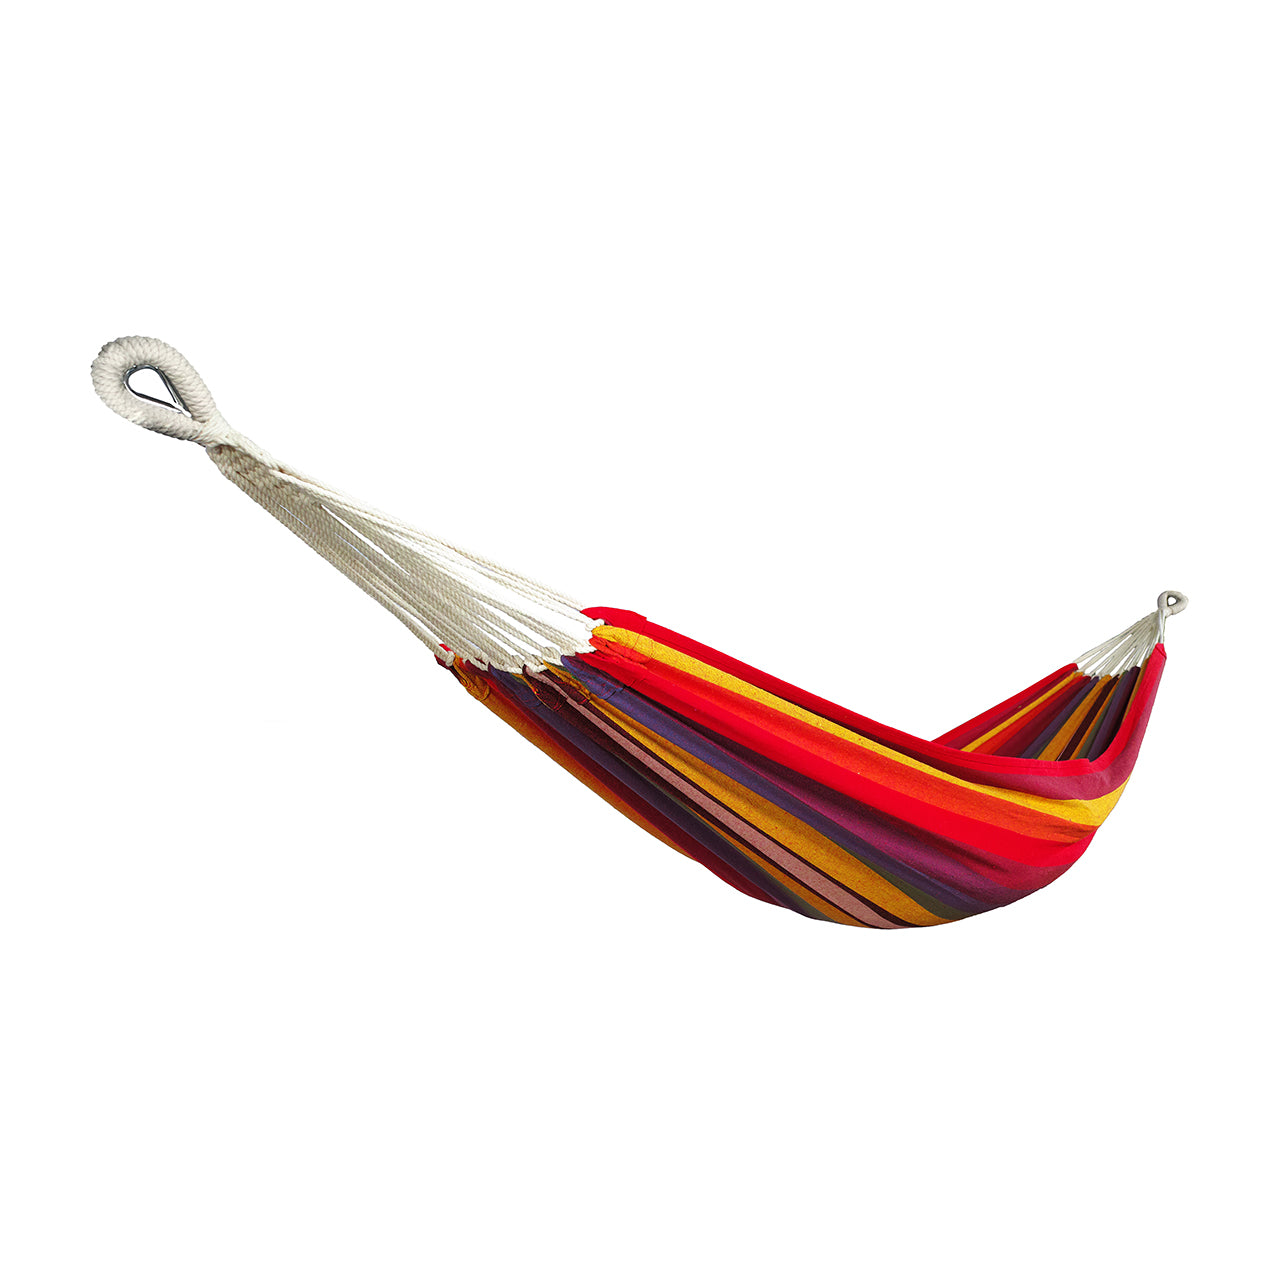 Bliss Hammocks 40-inch Wide Hammock in a Bag with Hand-woven Rope loops in the tequila sunrise stripe variation.